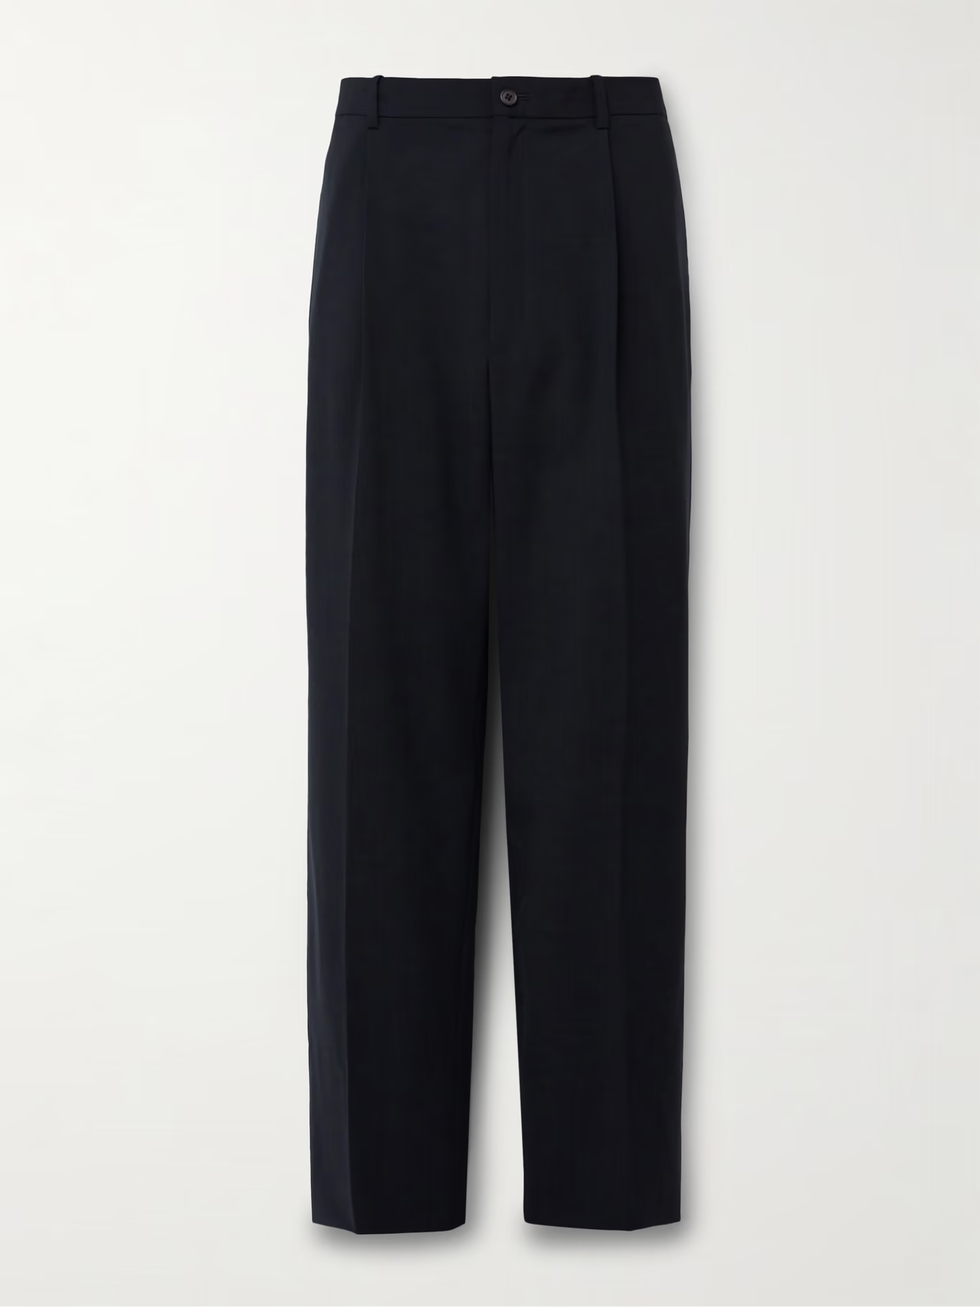 Keenan Pleated Woven Suit Trousers